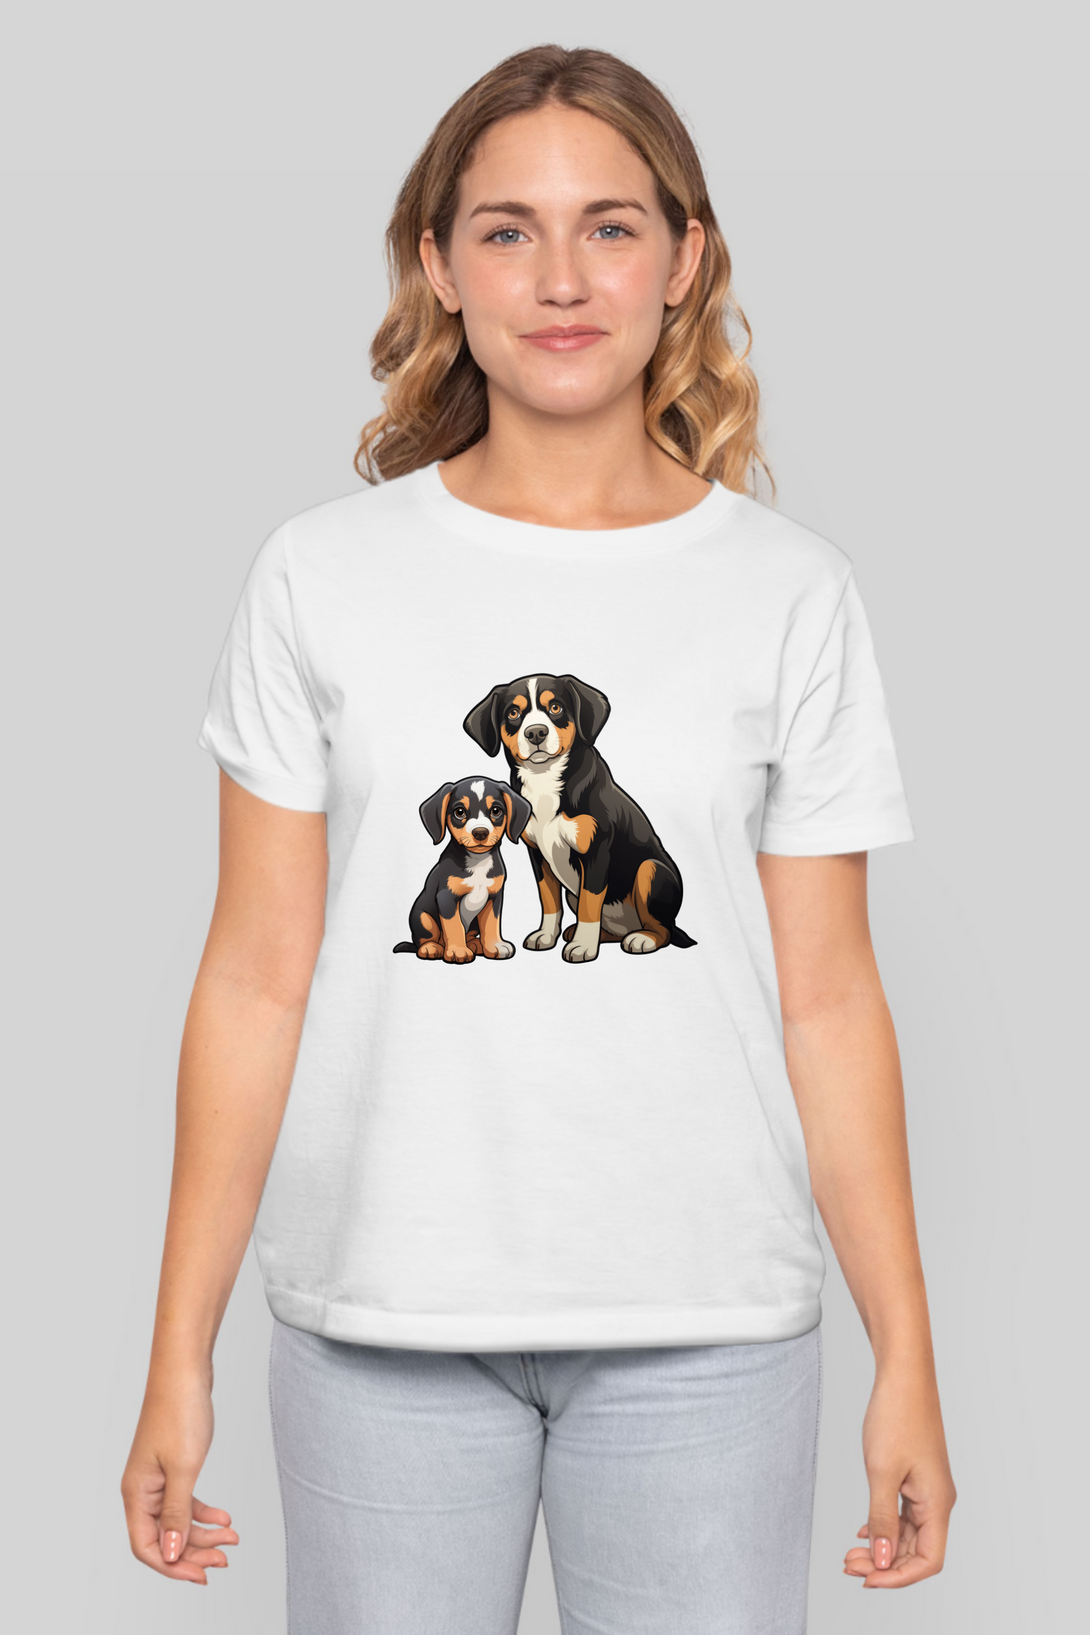 Puppy And Dog Printed T-Shirt For Women - WowWaves - 9